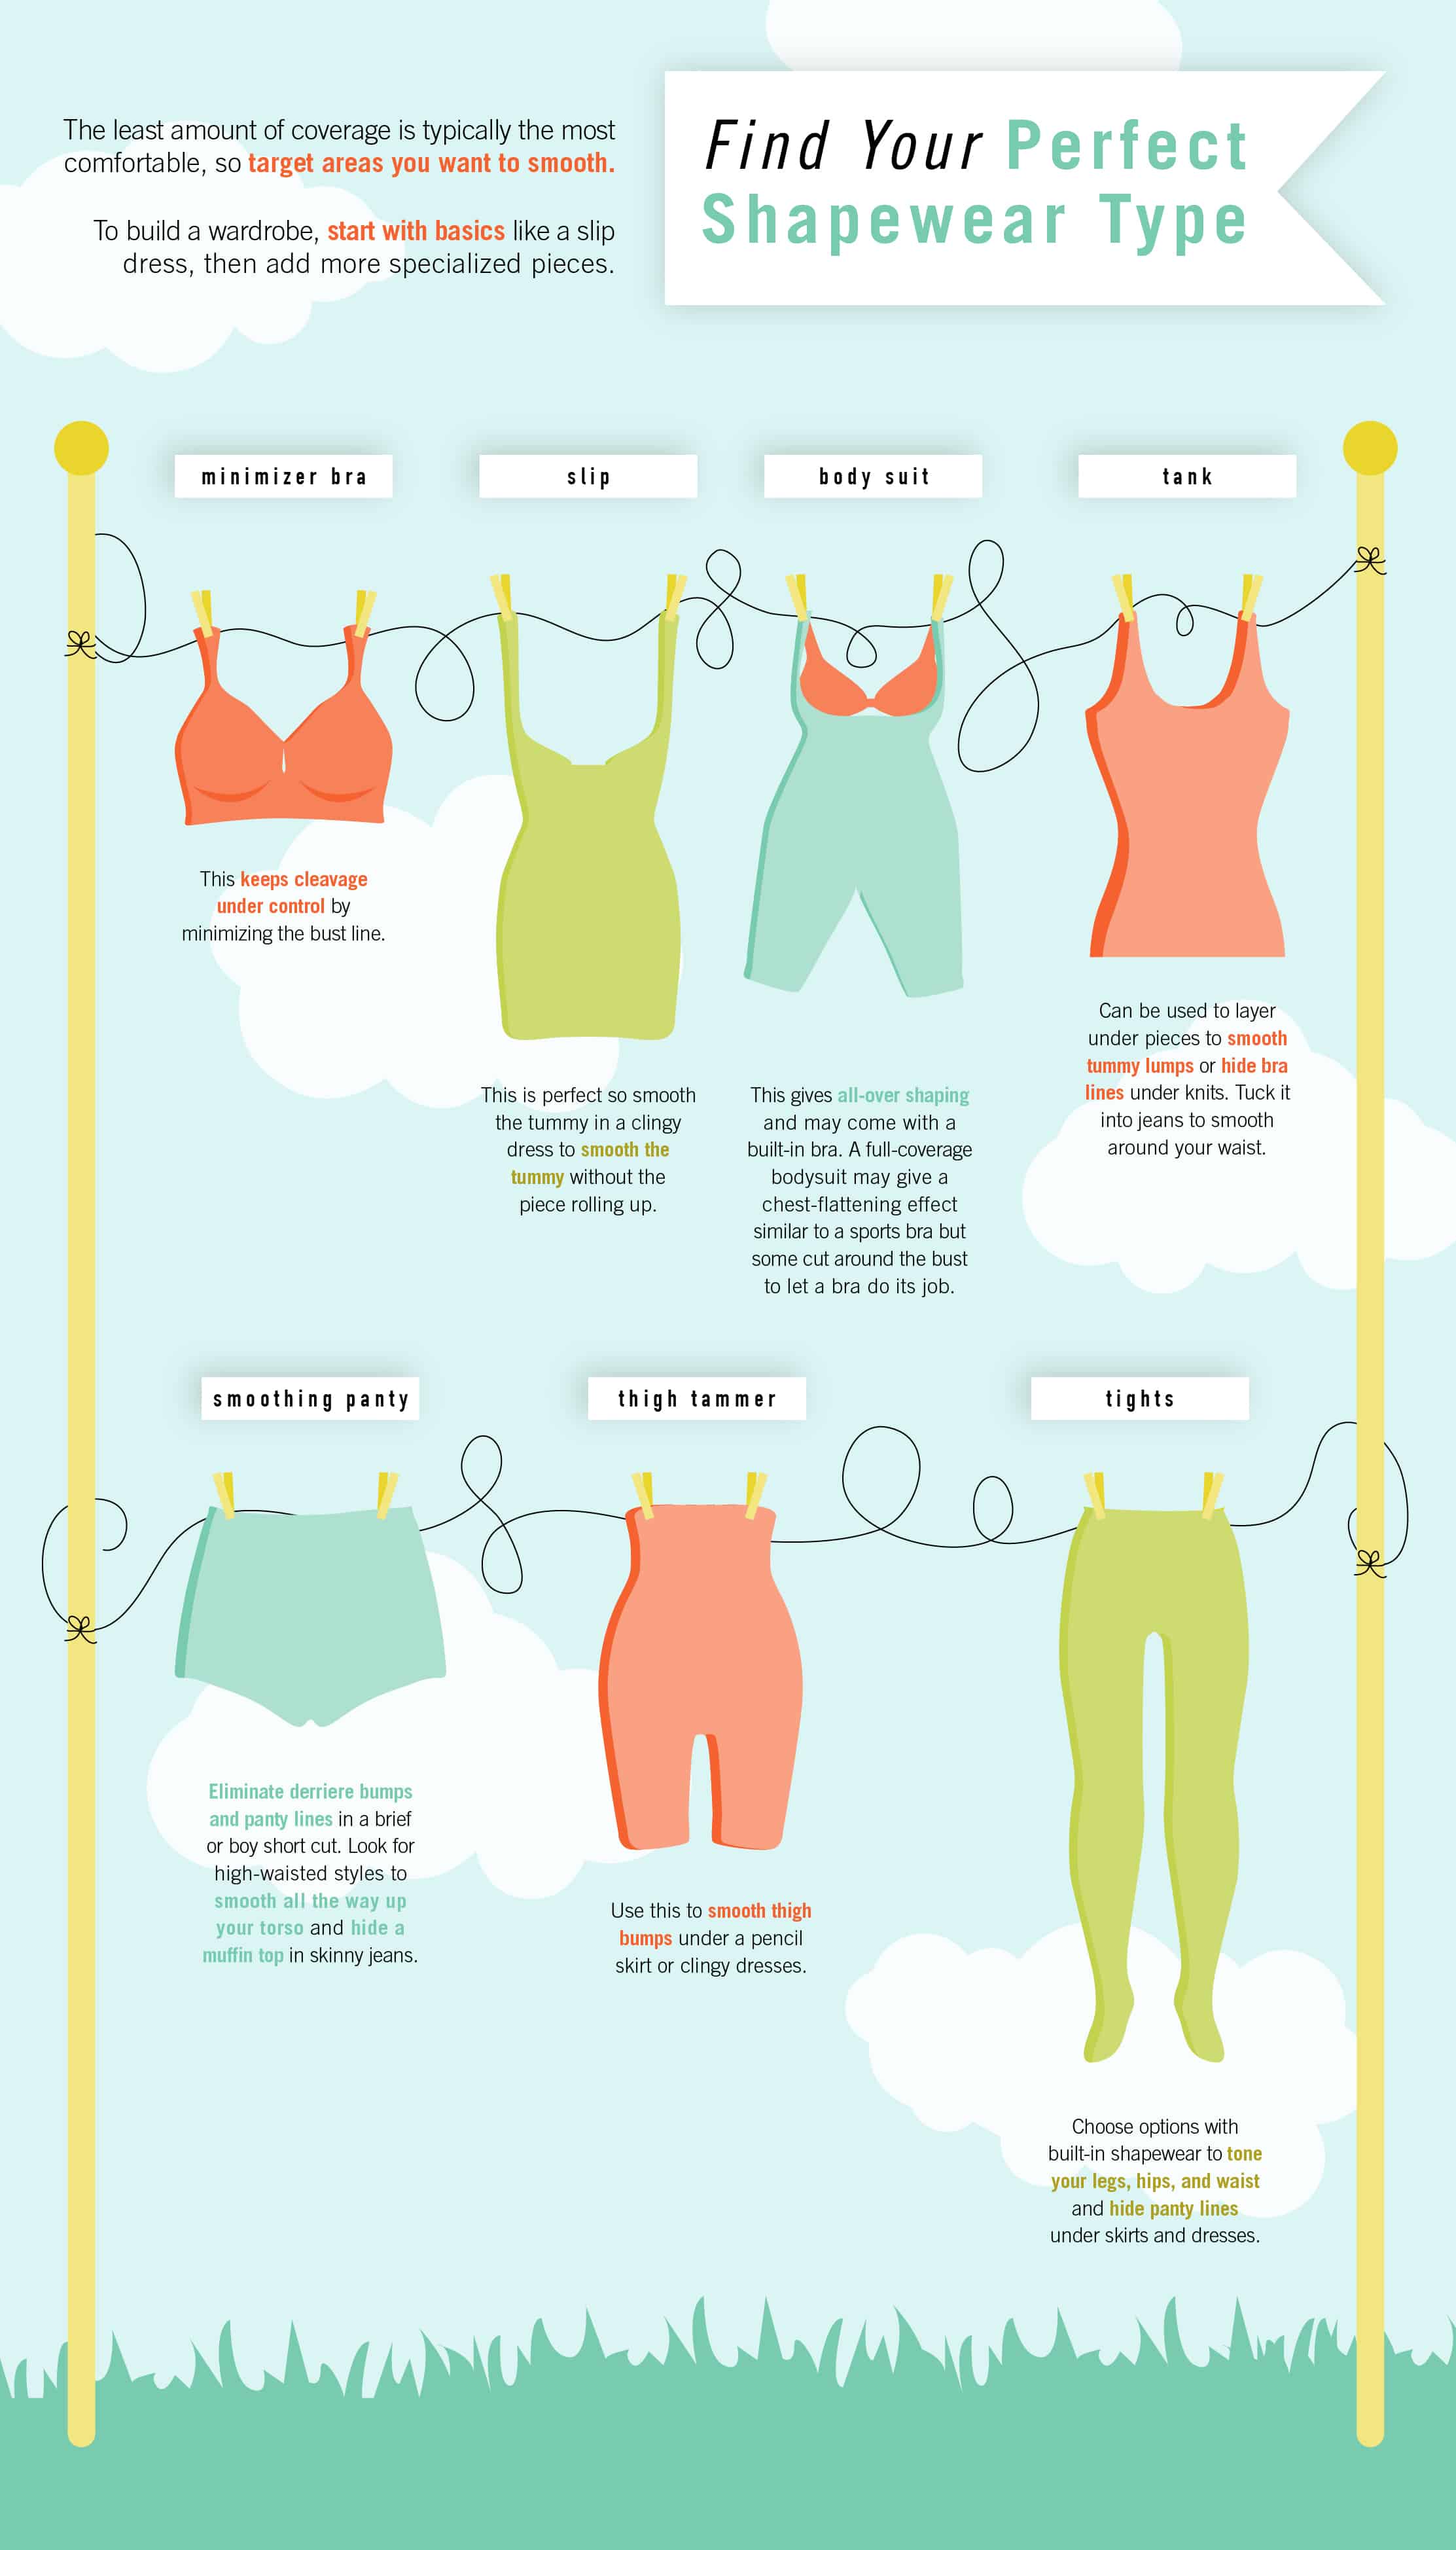 How to Choose, Wear, and Take Care of Shapewear - Health Perch